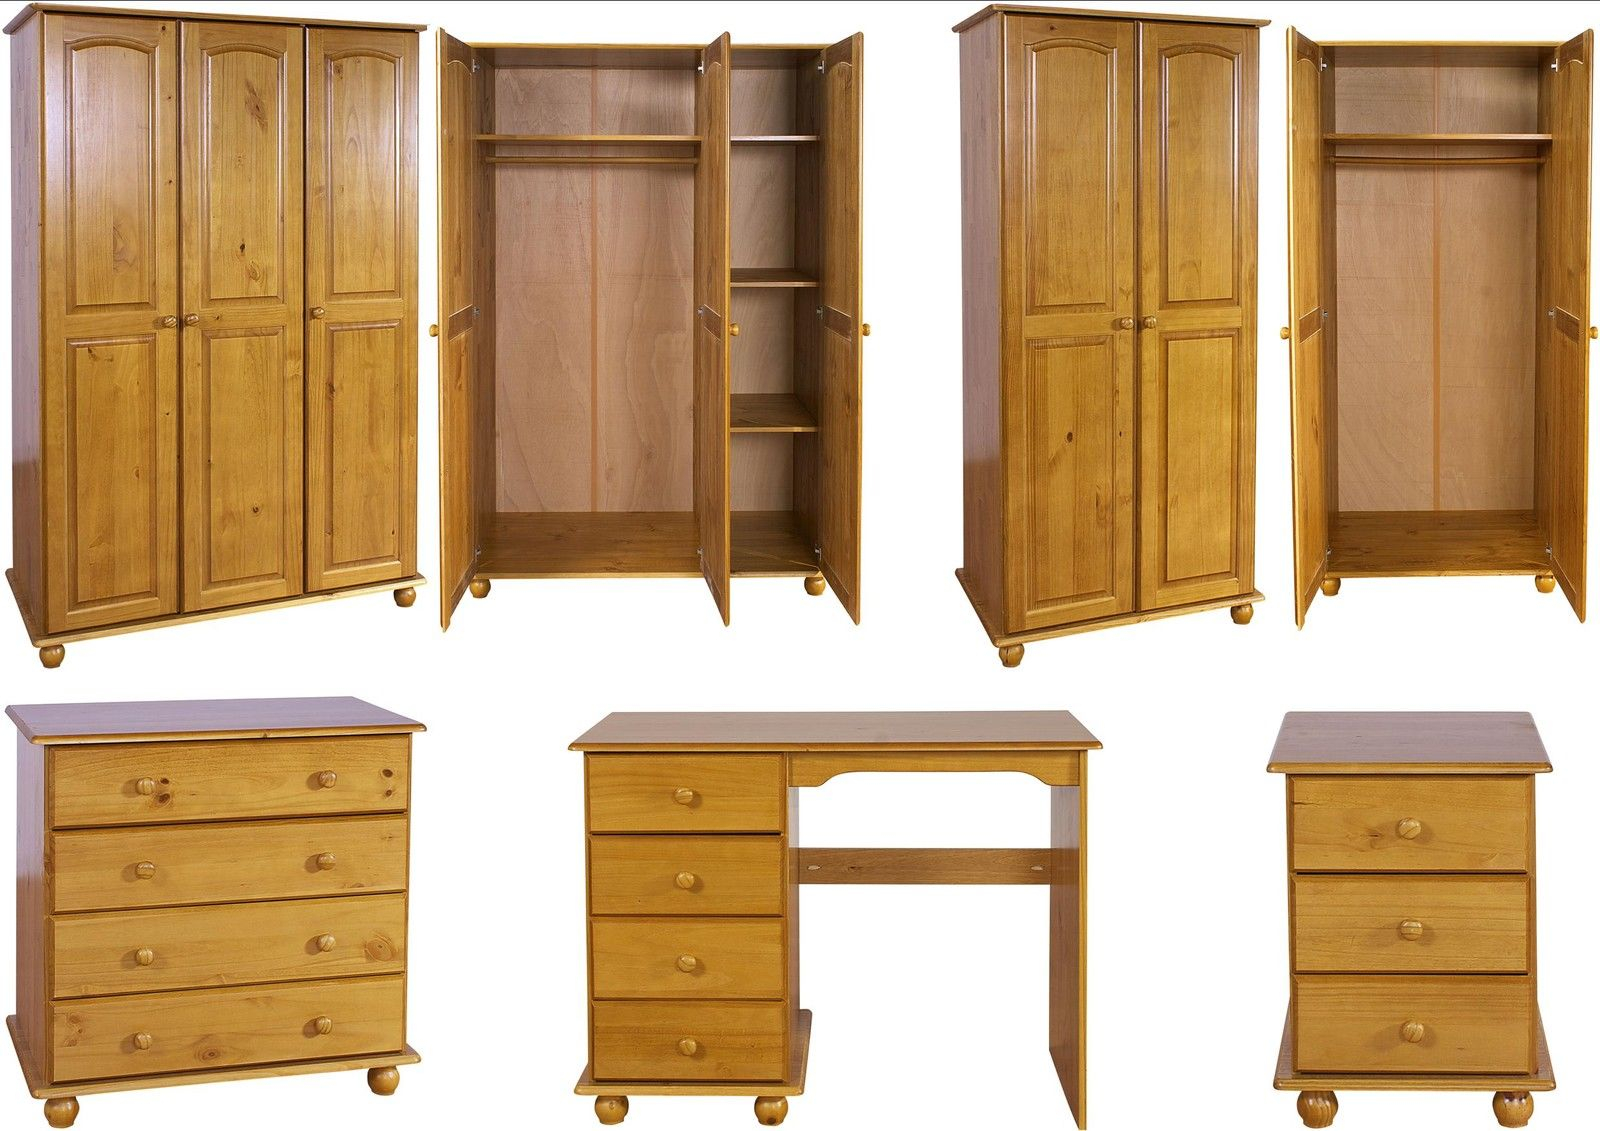 Details About Hampshire Solid Antique Pine Bedroom Furniture Wardrobe Drawers Bedside Desk Set with dimensions 1600 X 1131